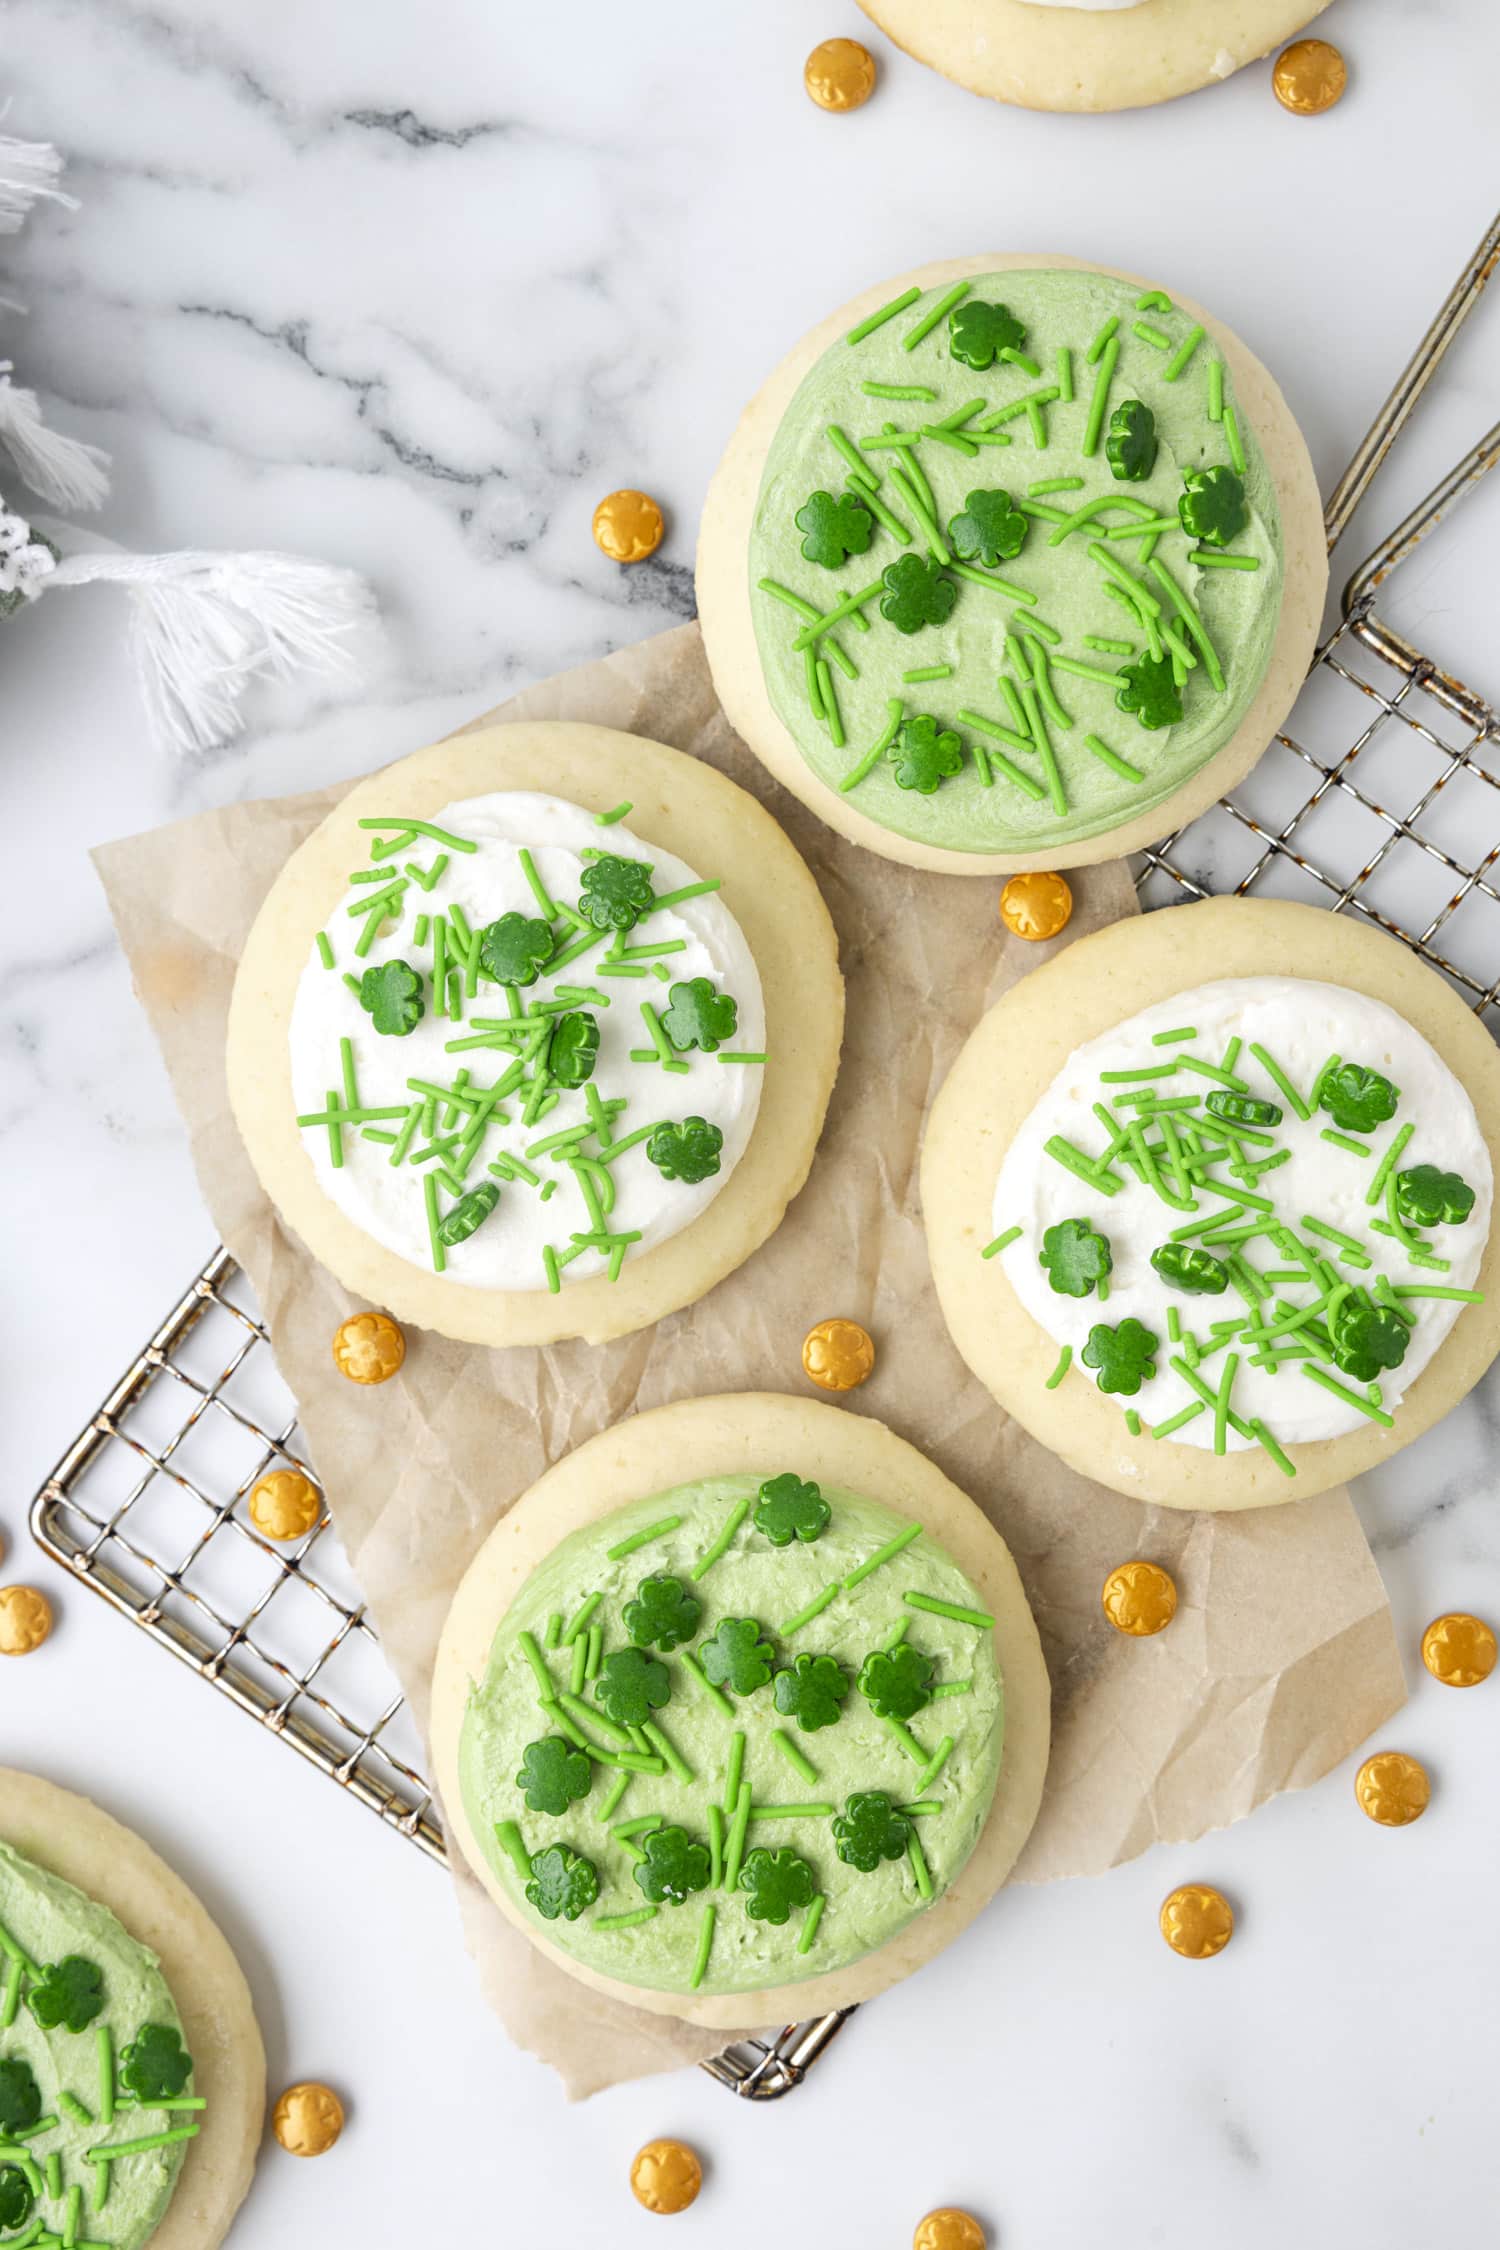 Sprinkle coated green St.Patrick's Day cookies